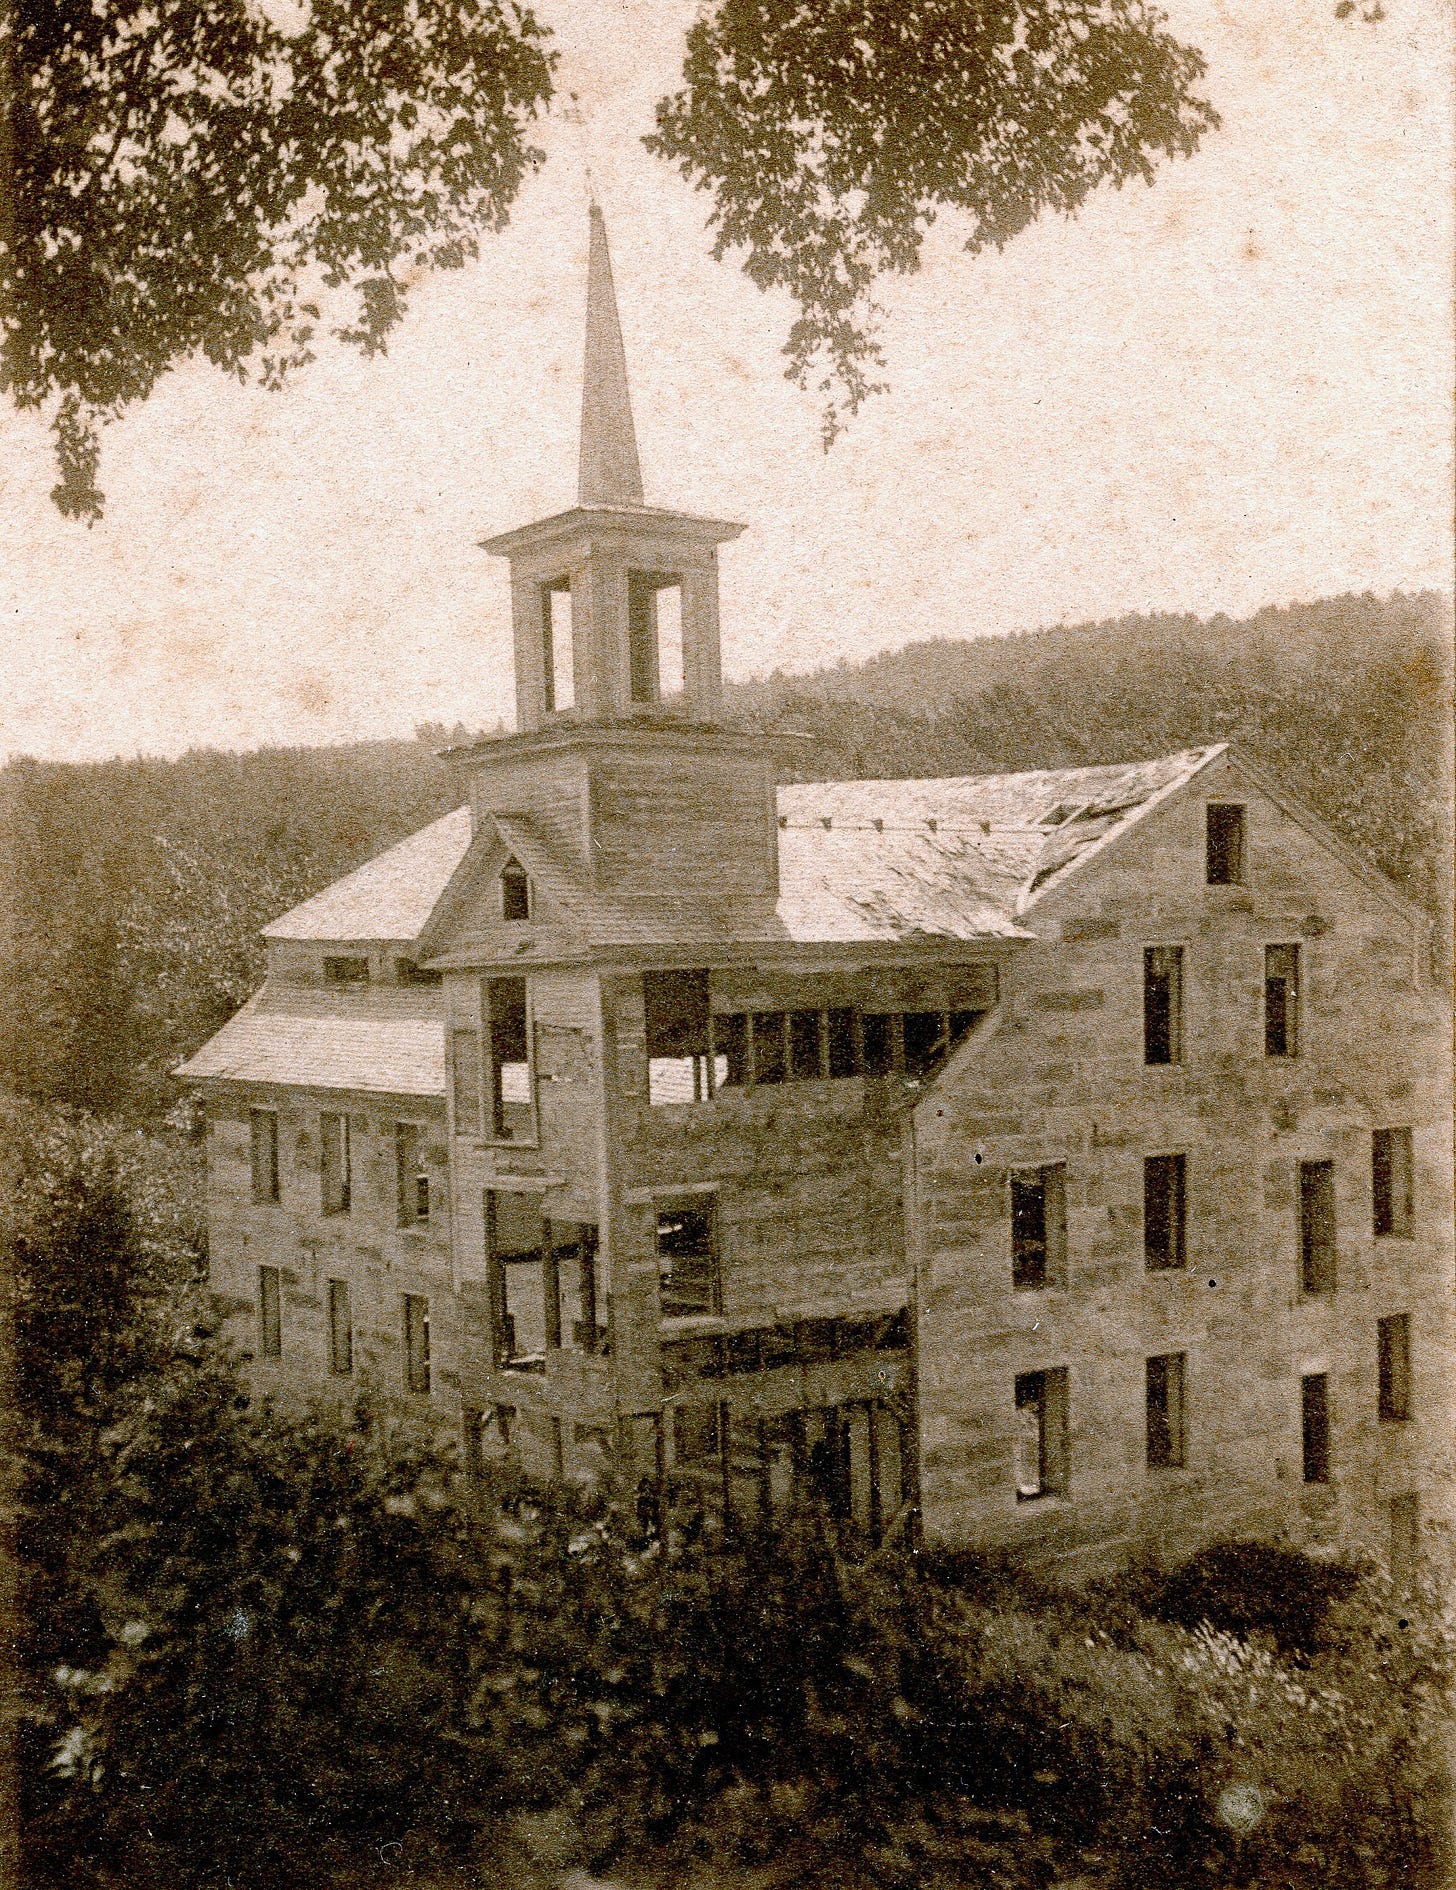 Browns Mill with tower